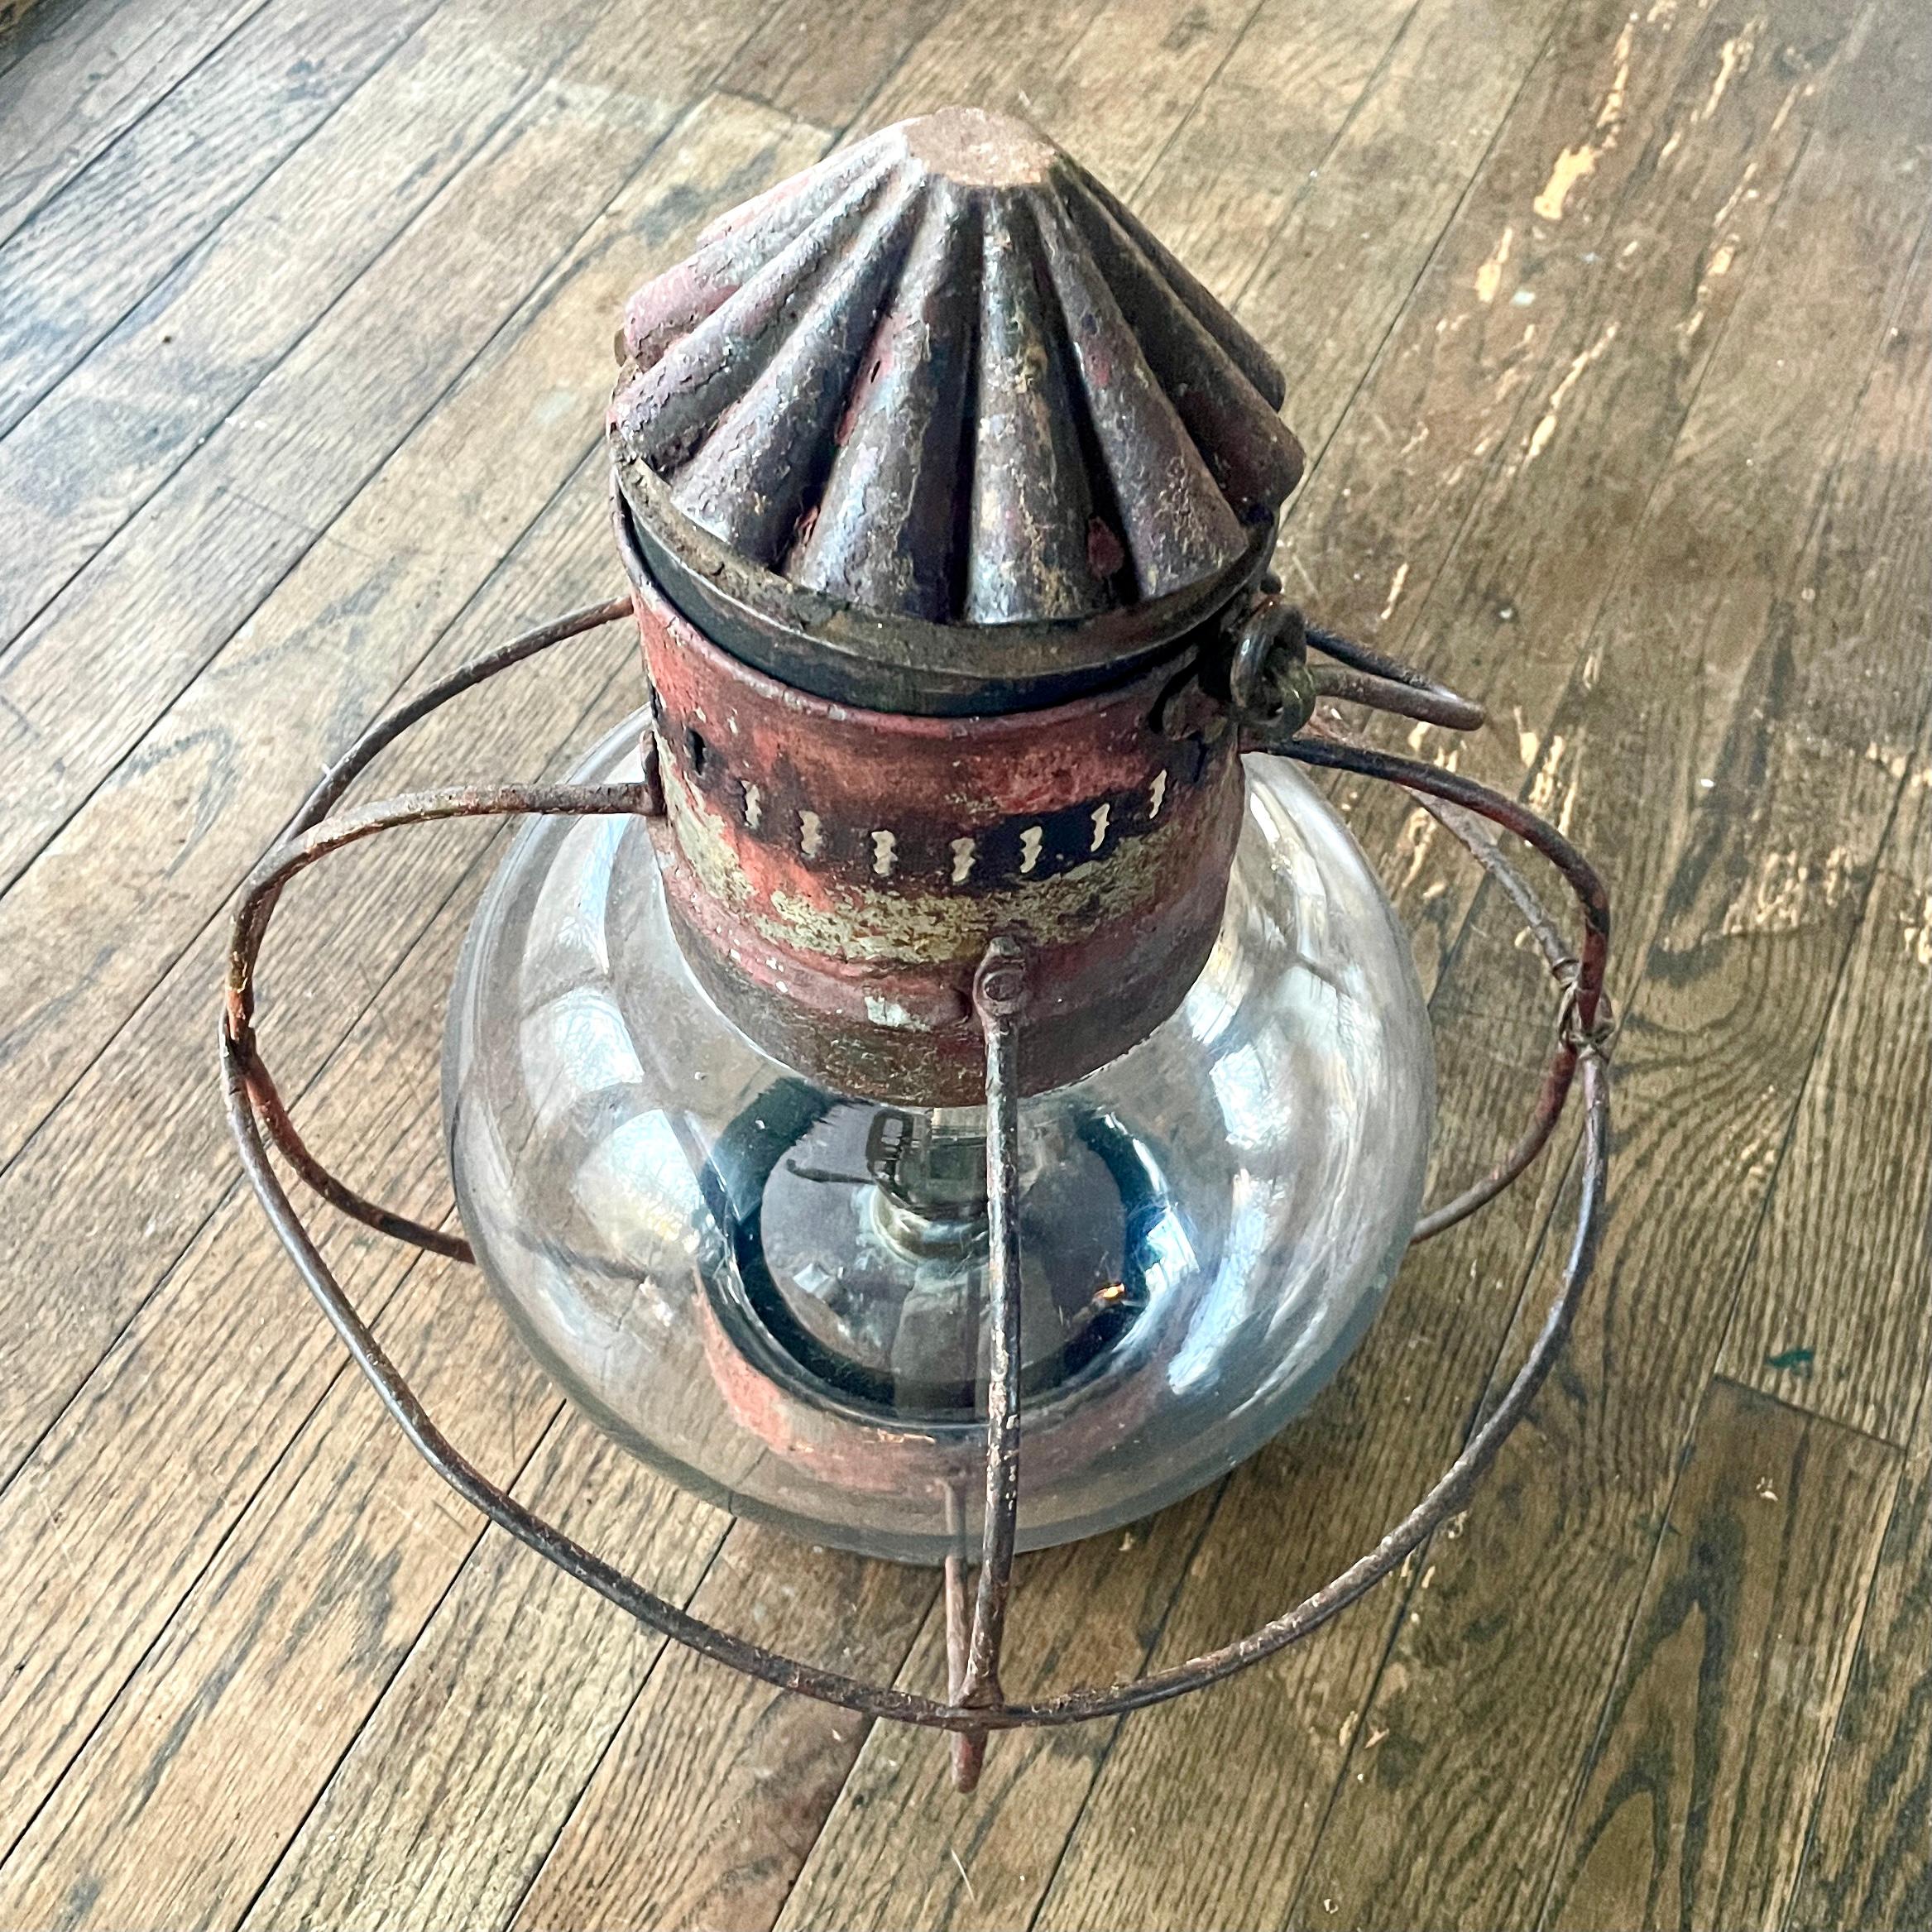 Nice antique onion lantern, unknown maker. A wonderful rustic decor for tabletop or hanging. Sold as a prop for decor only, the function of the oil canister is unknown and untested.